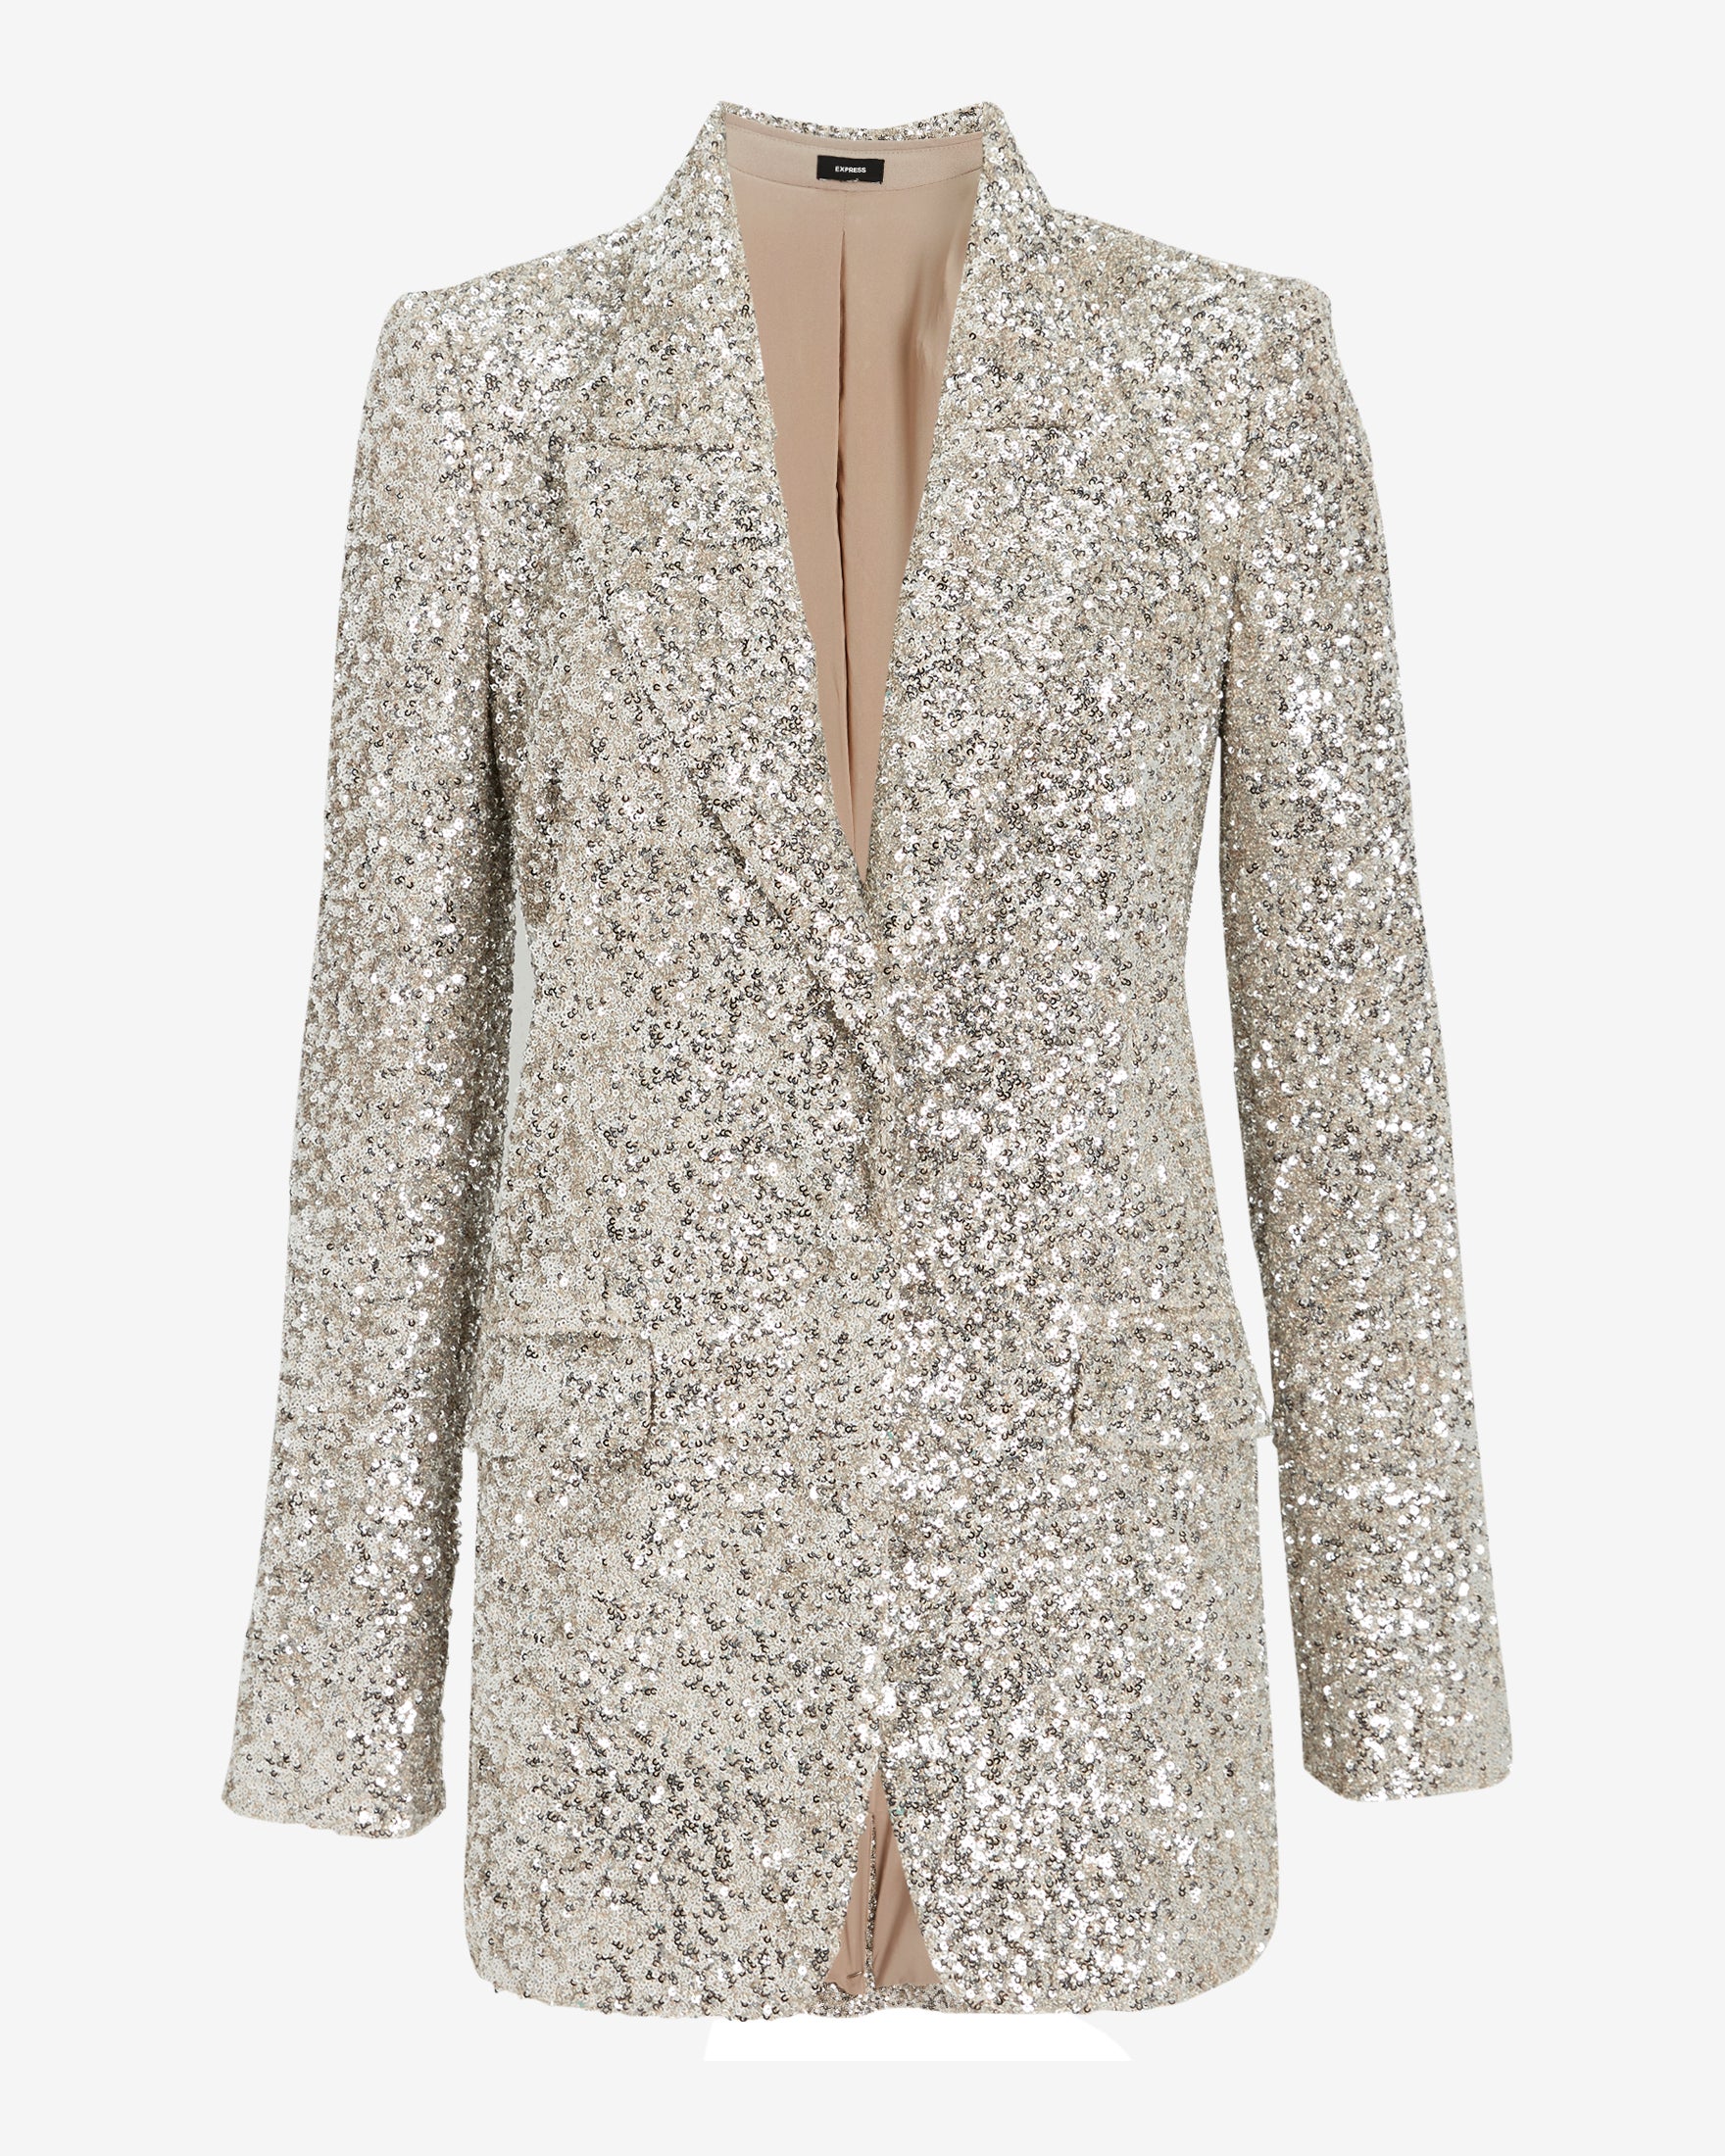 Blazer covered in silver sequins